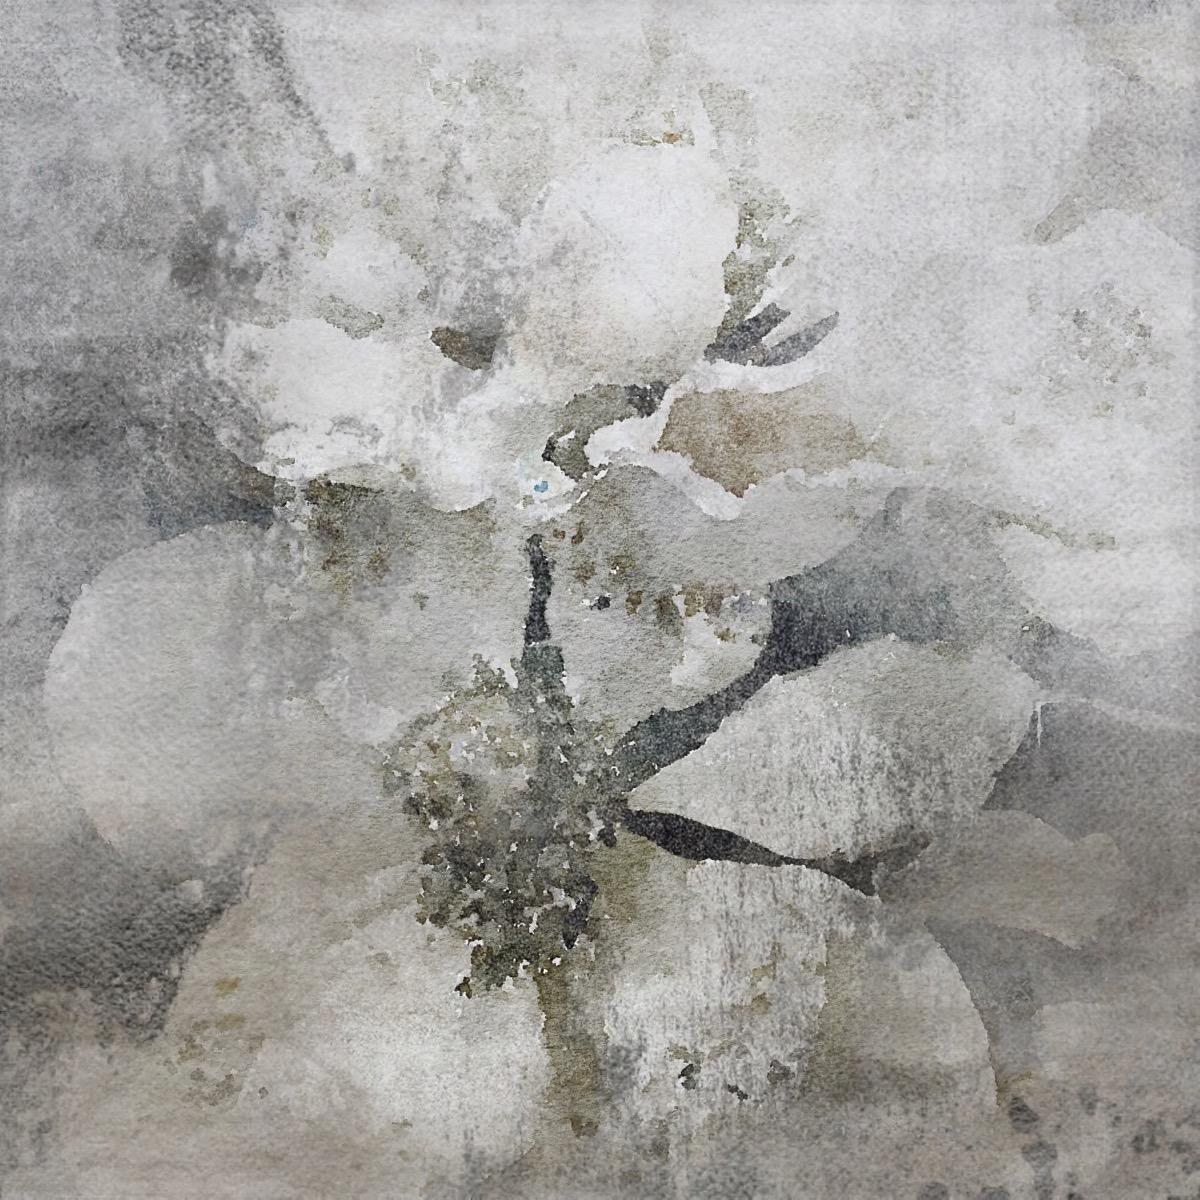 Irena Orlov Still-Life Painting - Lightly Frosted Silver Rustic Flowers Art Textured Giclee on Canvas 45x45" 